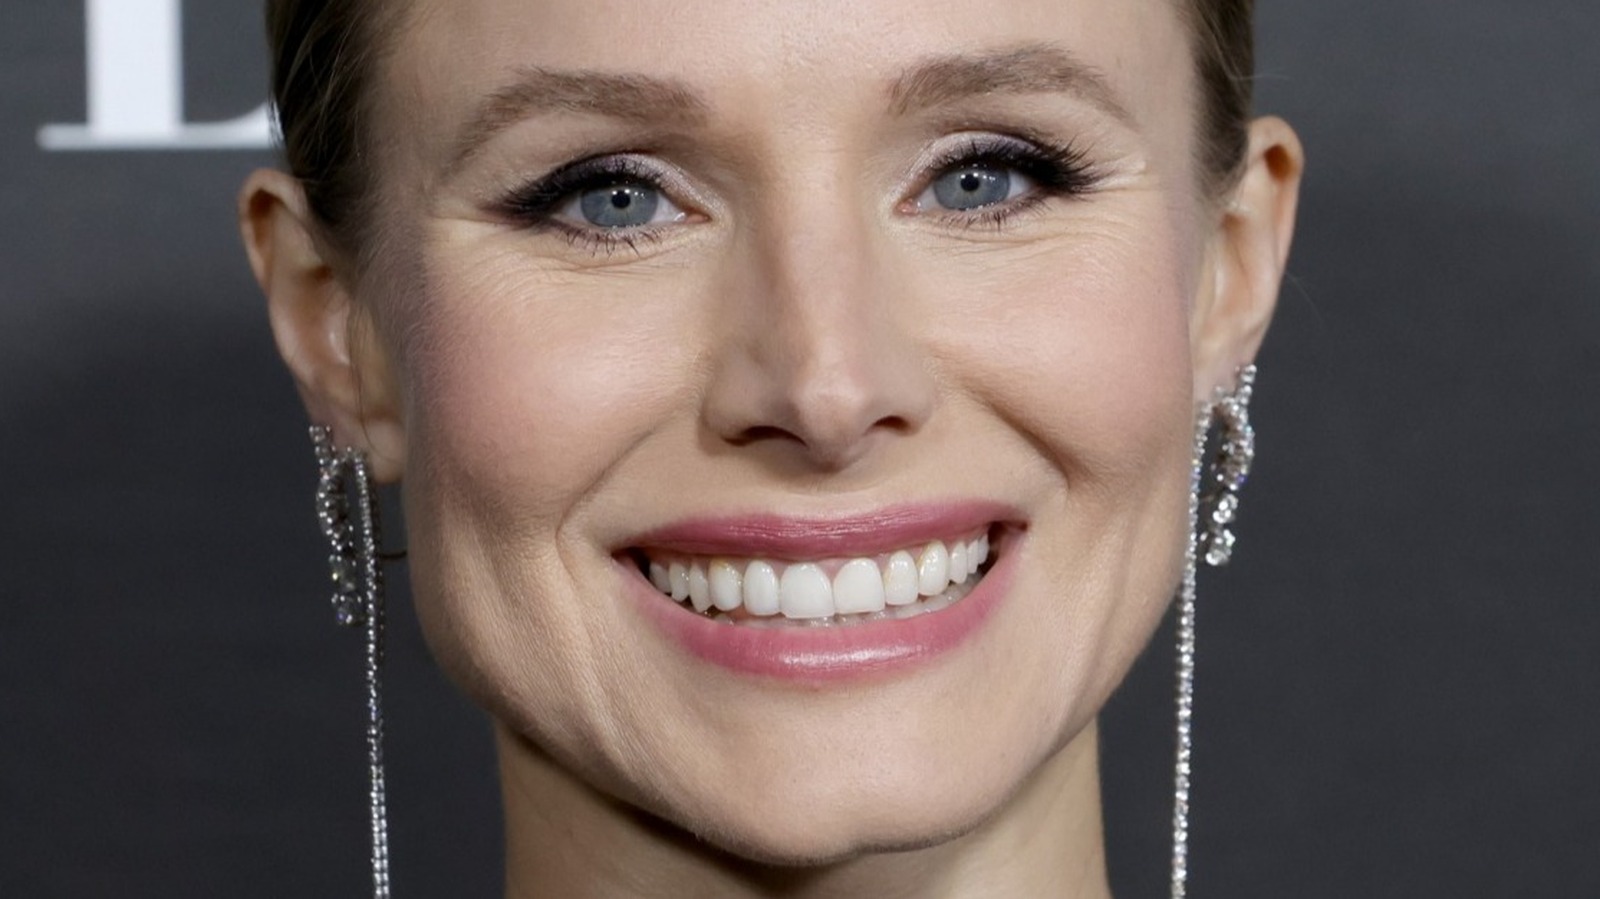 Kristen Bell: 'Veronica Mars' Could Be My Whole Life: Photo